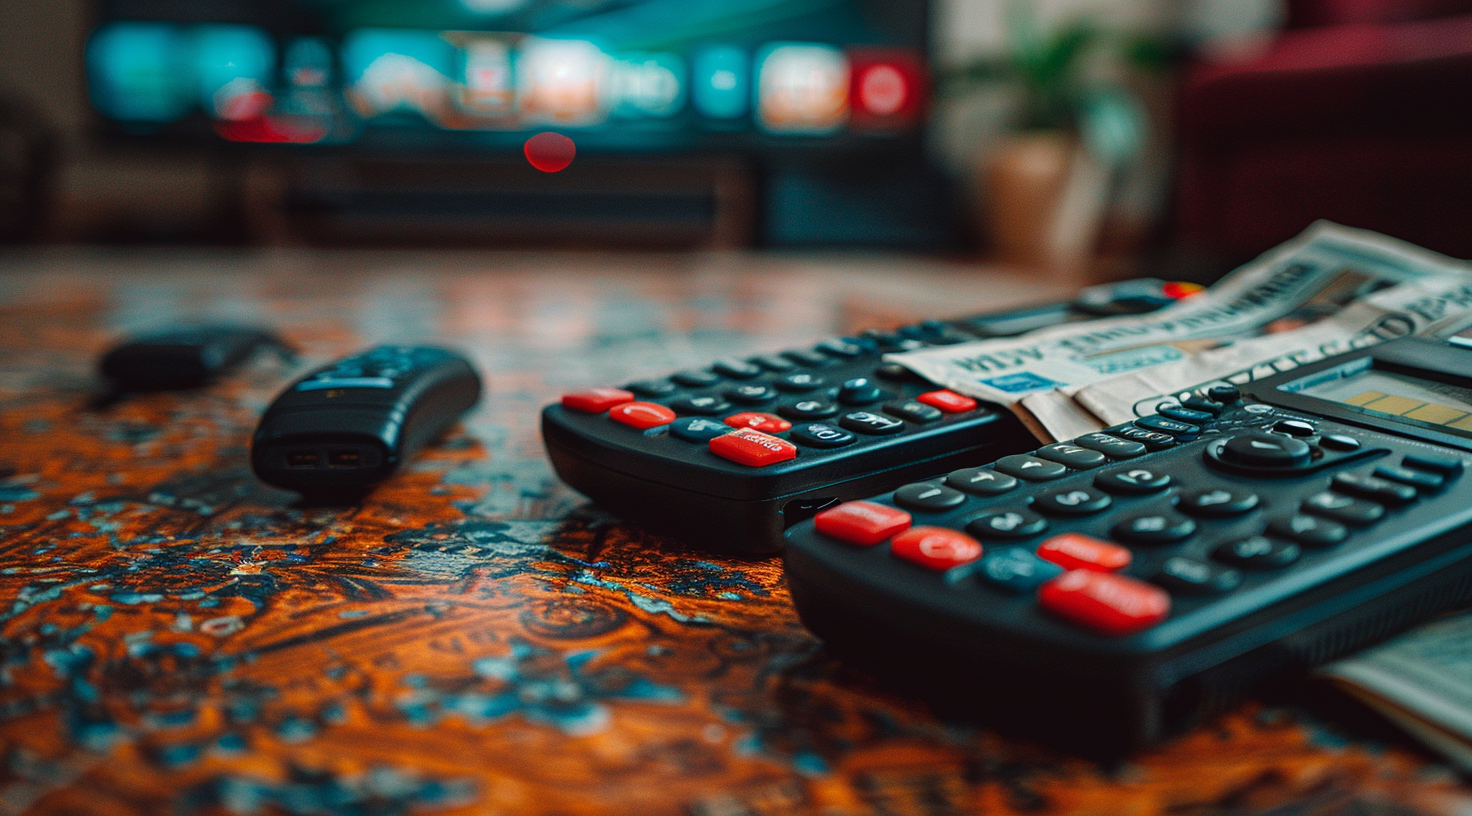 Top 5 Reasons to Invest in a Streaming Device